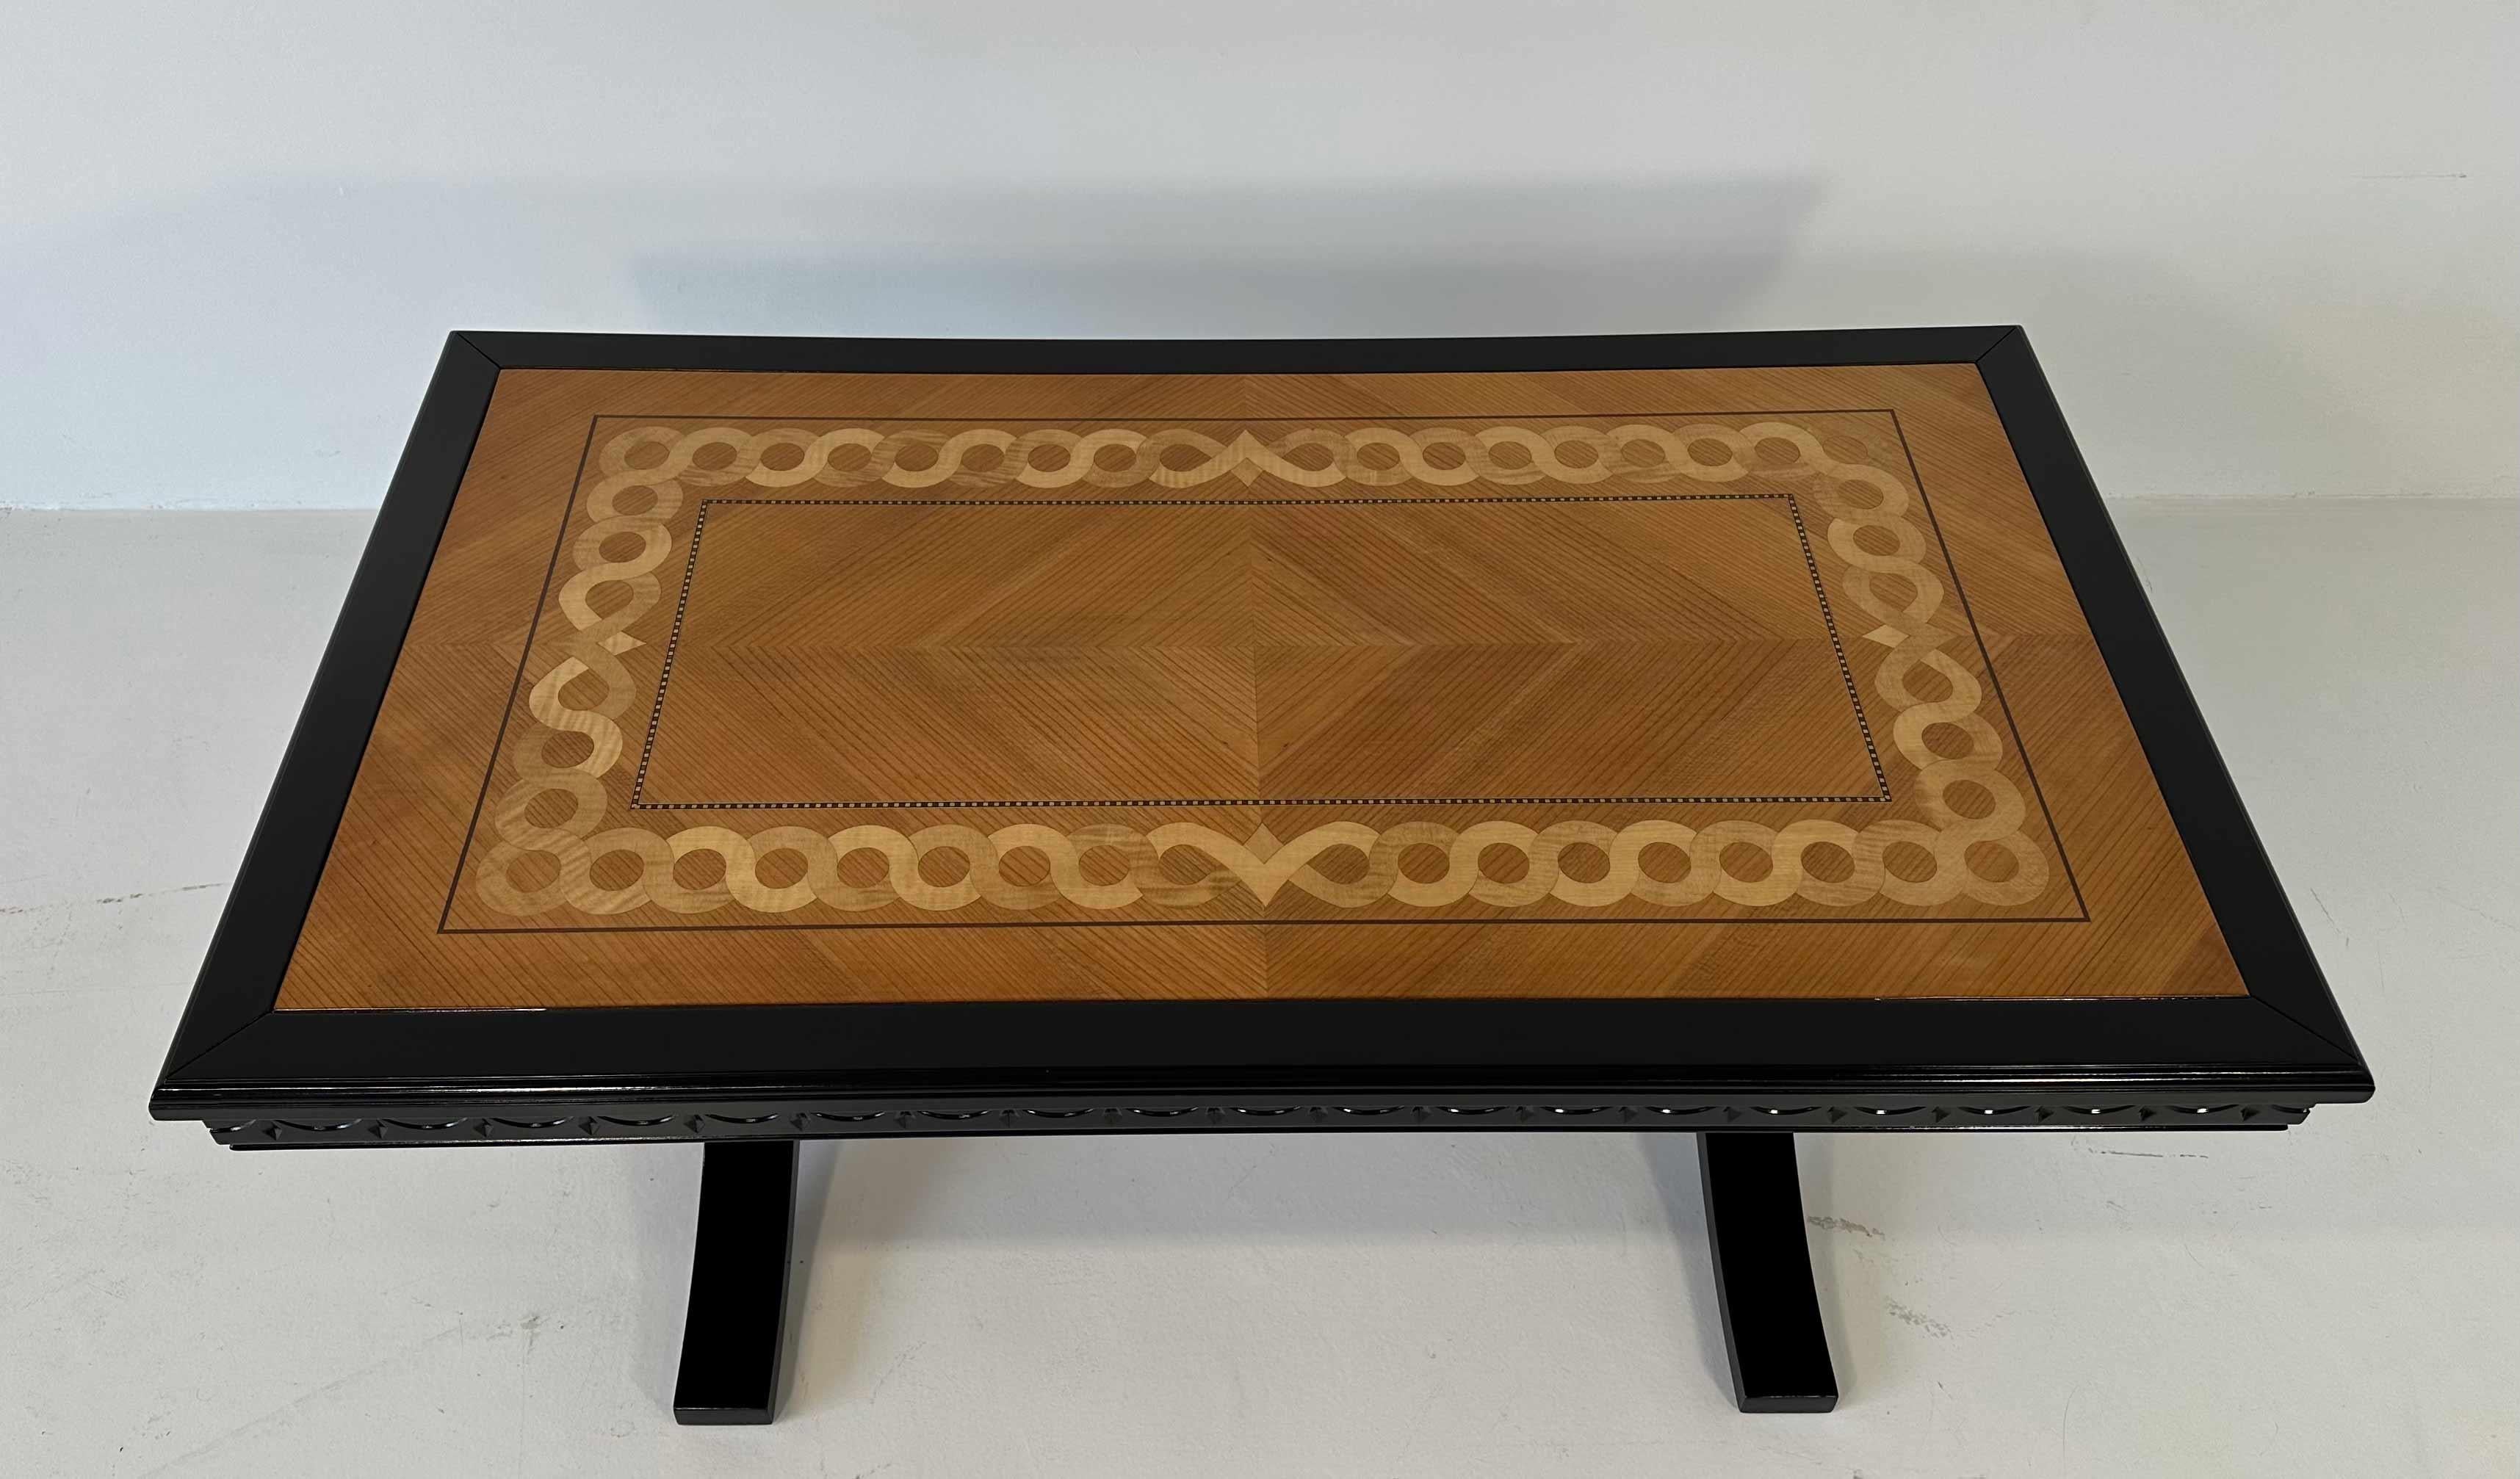 Ebonized Italian Art Deco Style Maple and Ash Wood Inlaid Coffee Table, 1980s For Sale